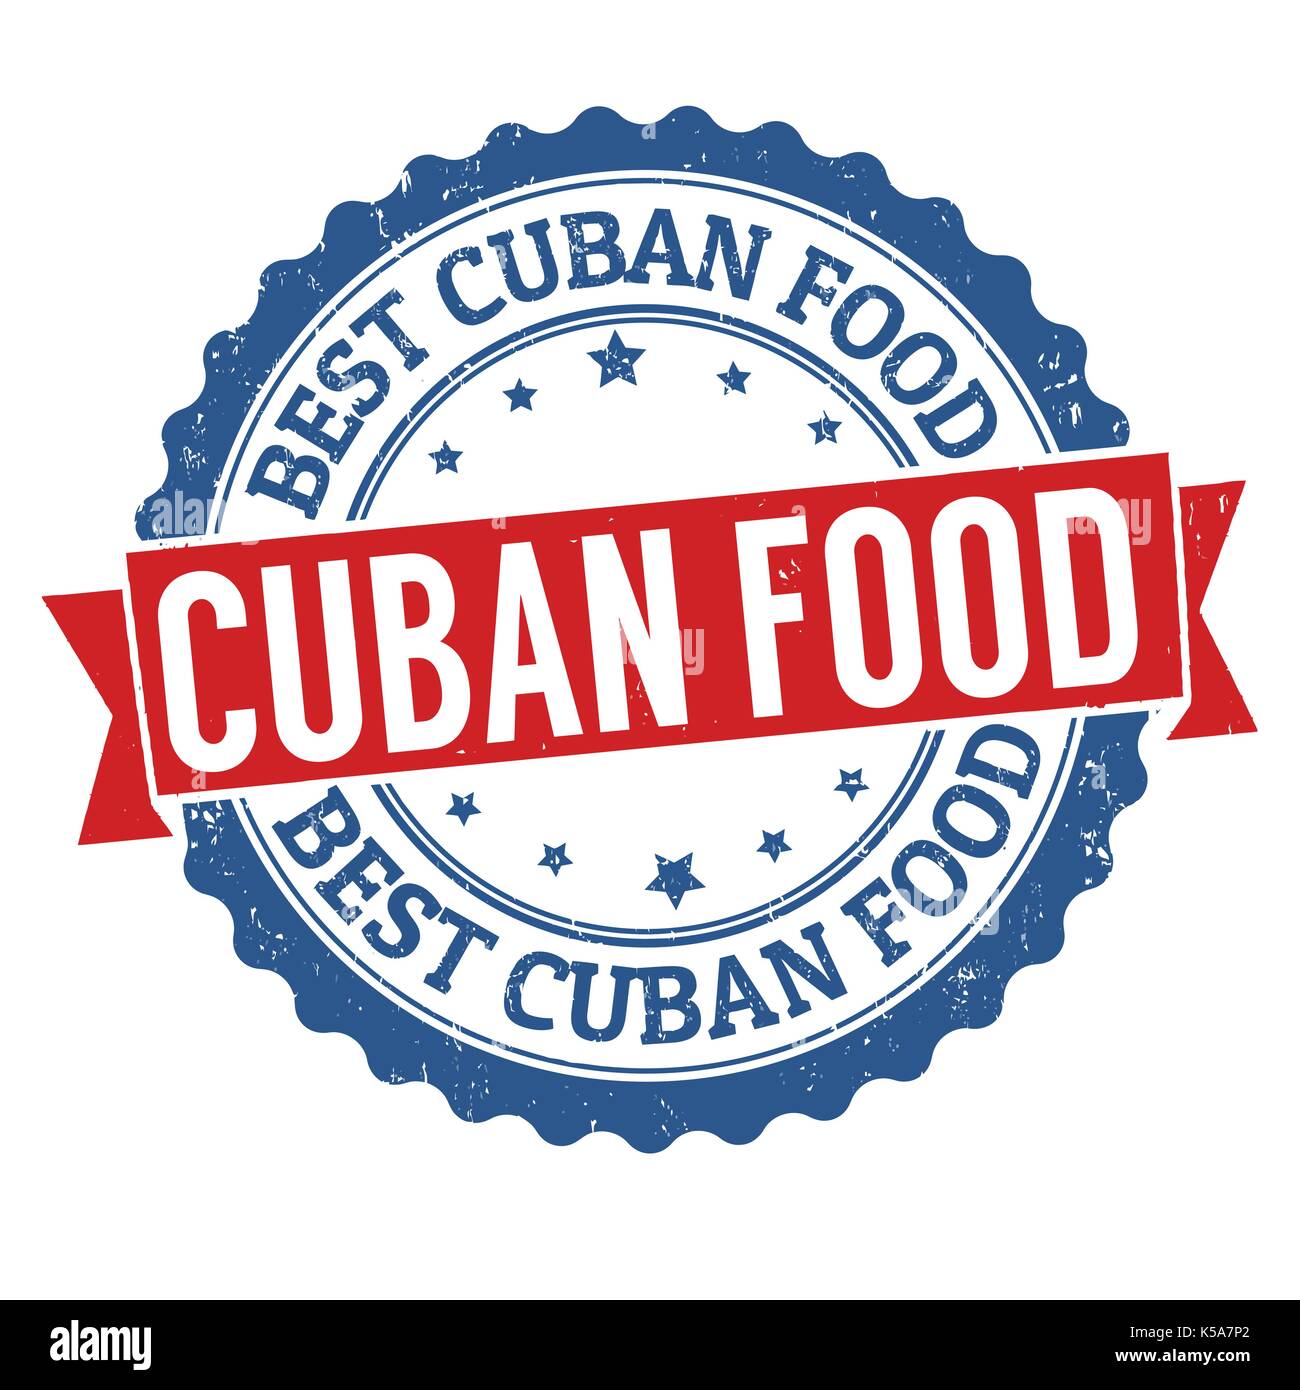 Cuban food sign or stamp on white background, vector illustration Stock Vector